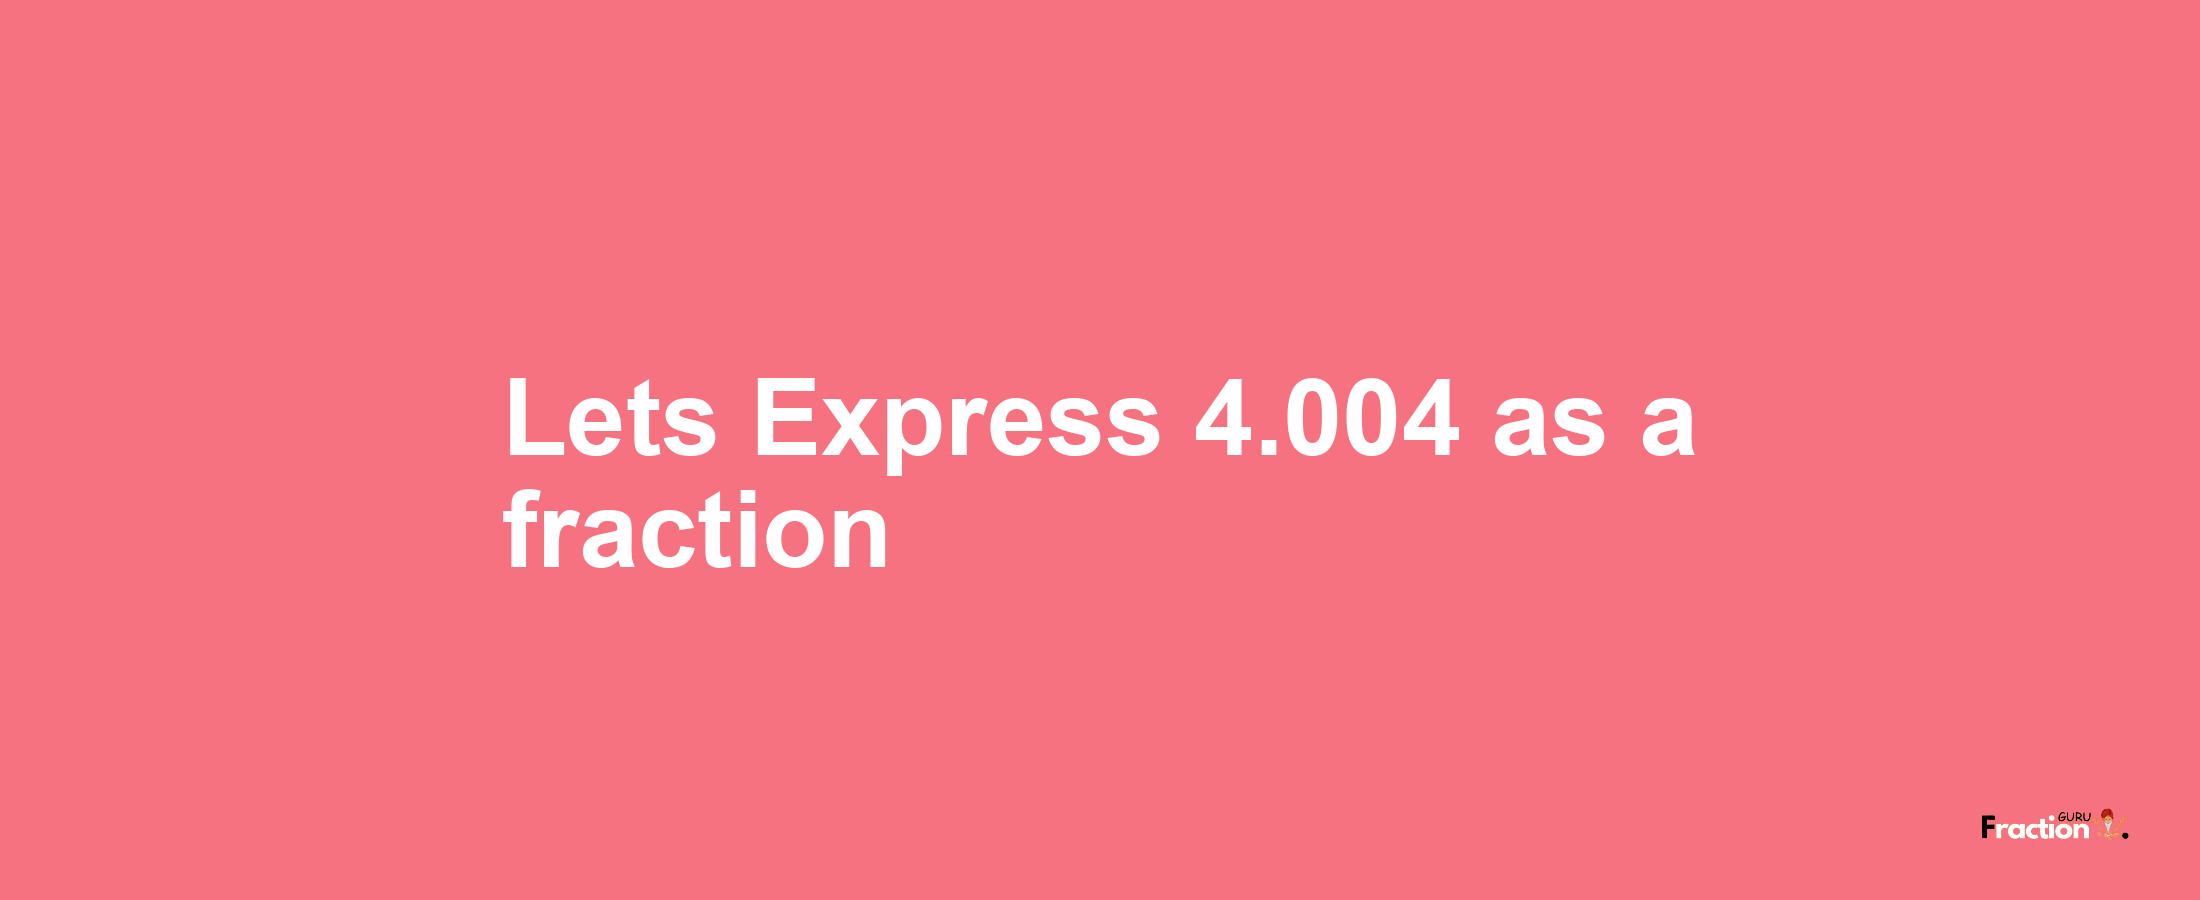 Lets Express 4.004 as afraction